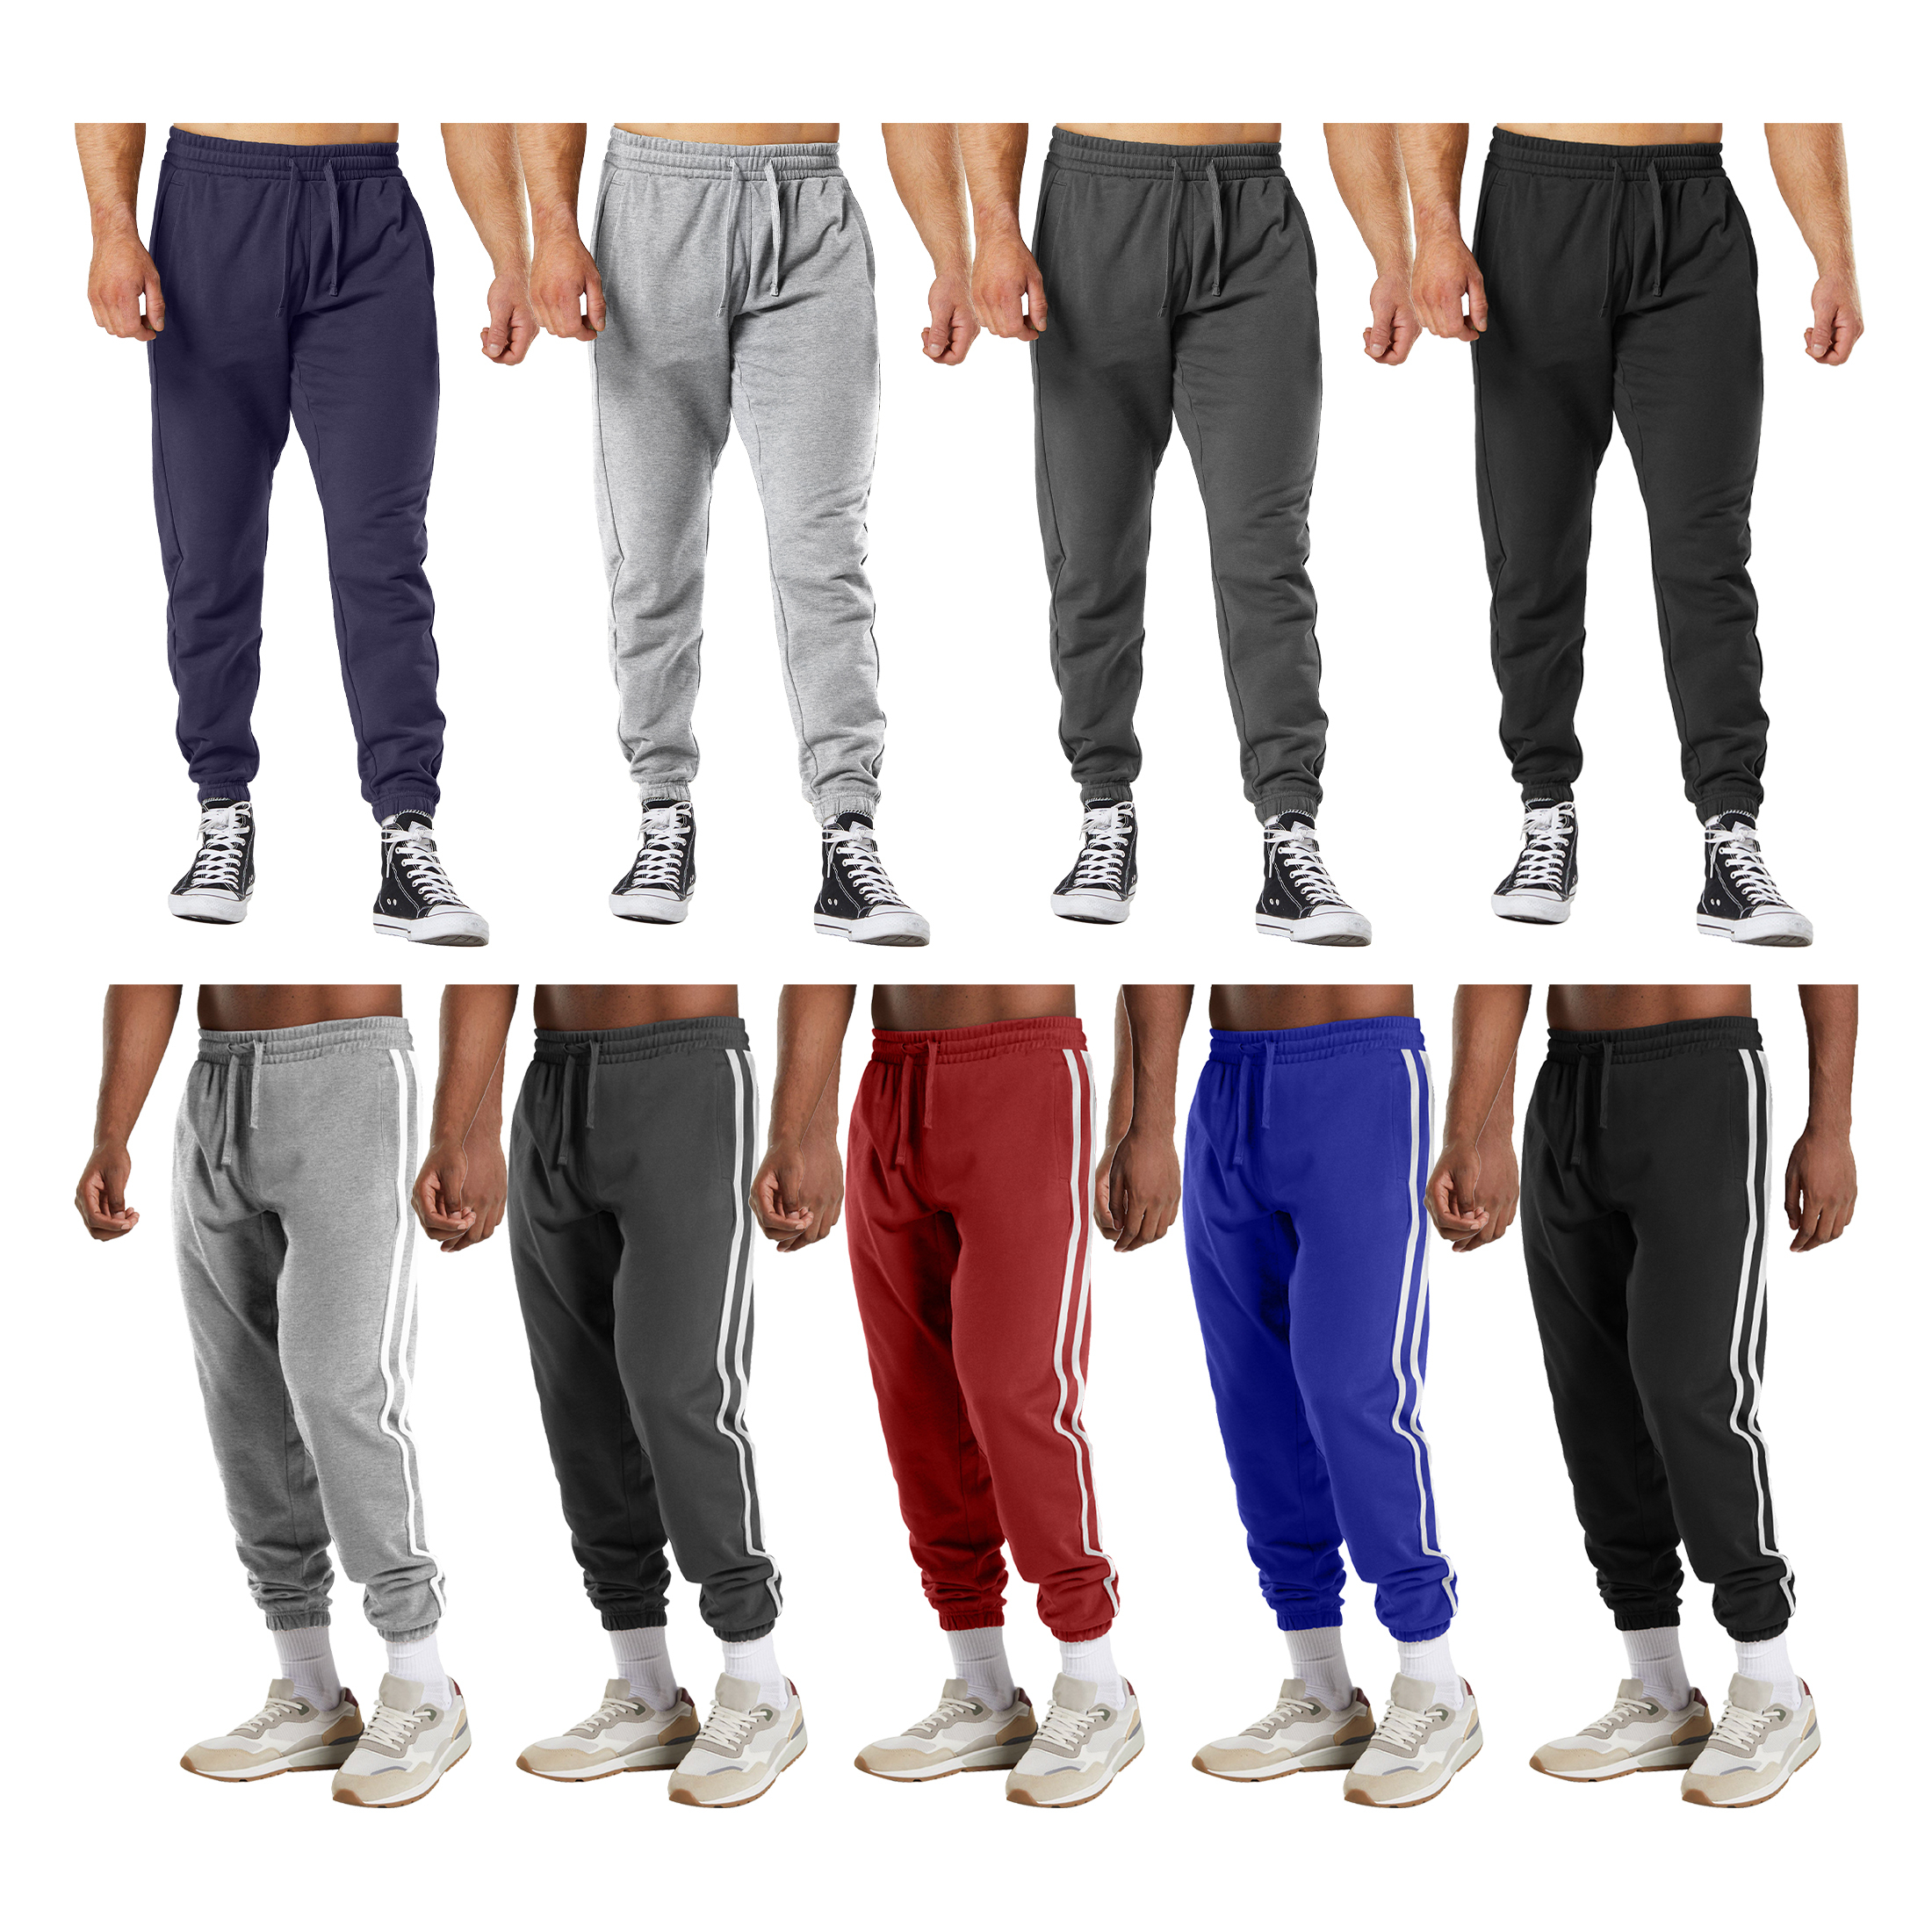 Multi-Pack: Men's Casual Fleece-Lined Elastic Bottom Jogger Pants With Pockets - 1-PACK, S